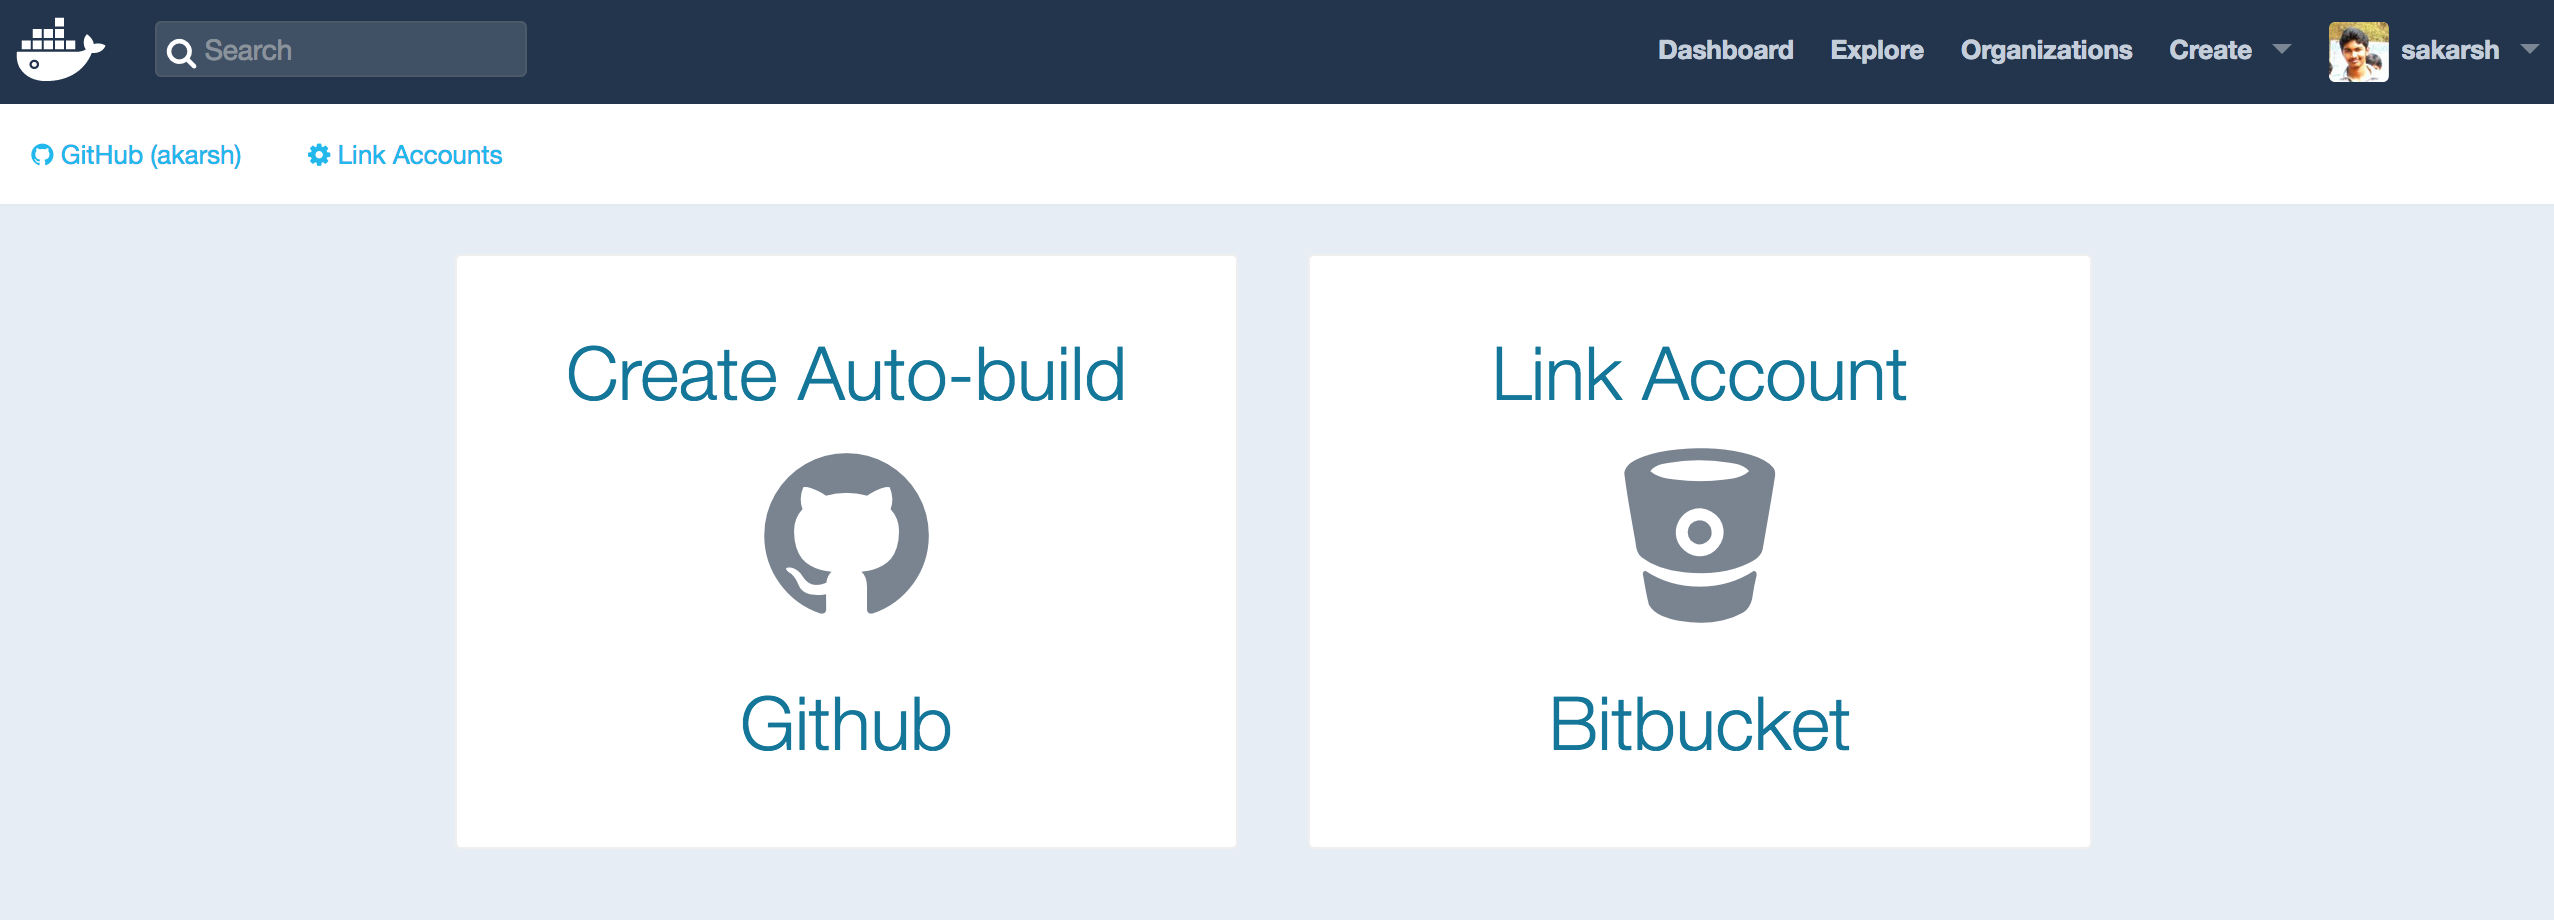 select the linked github account to access the github repository